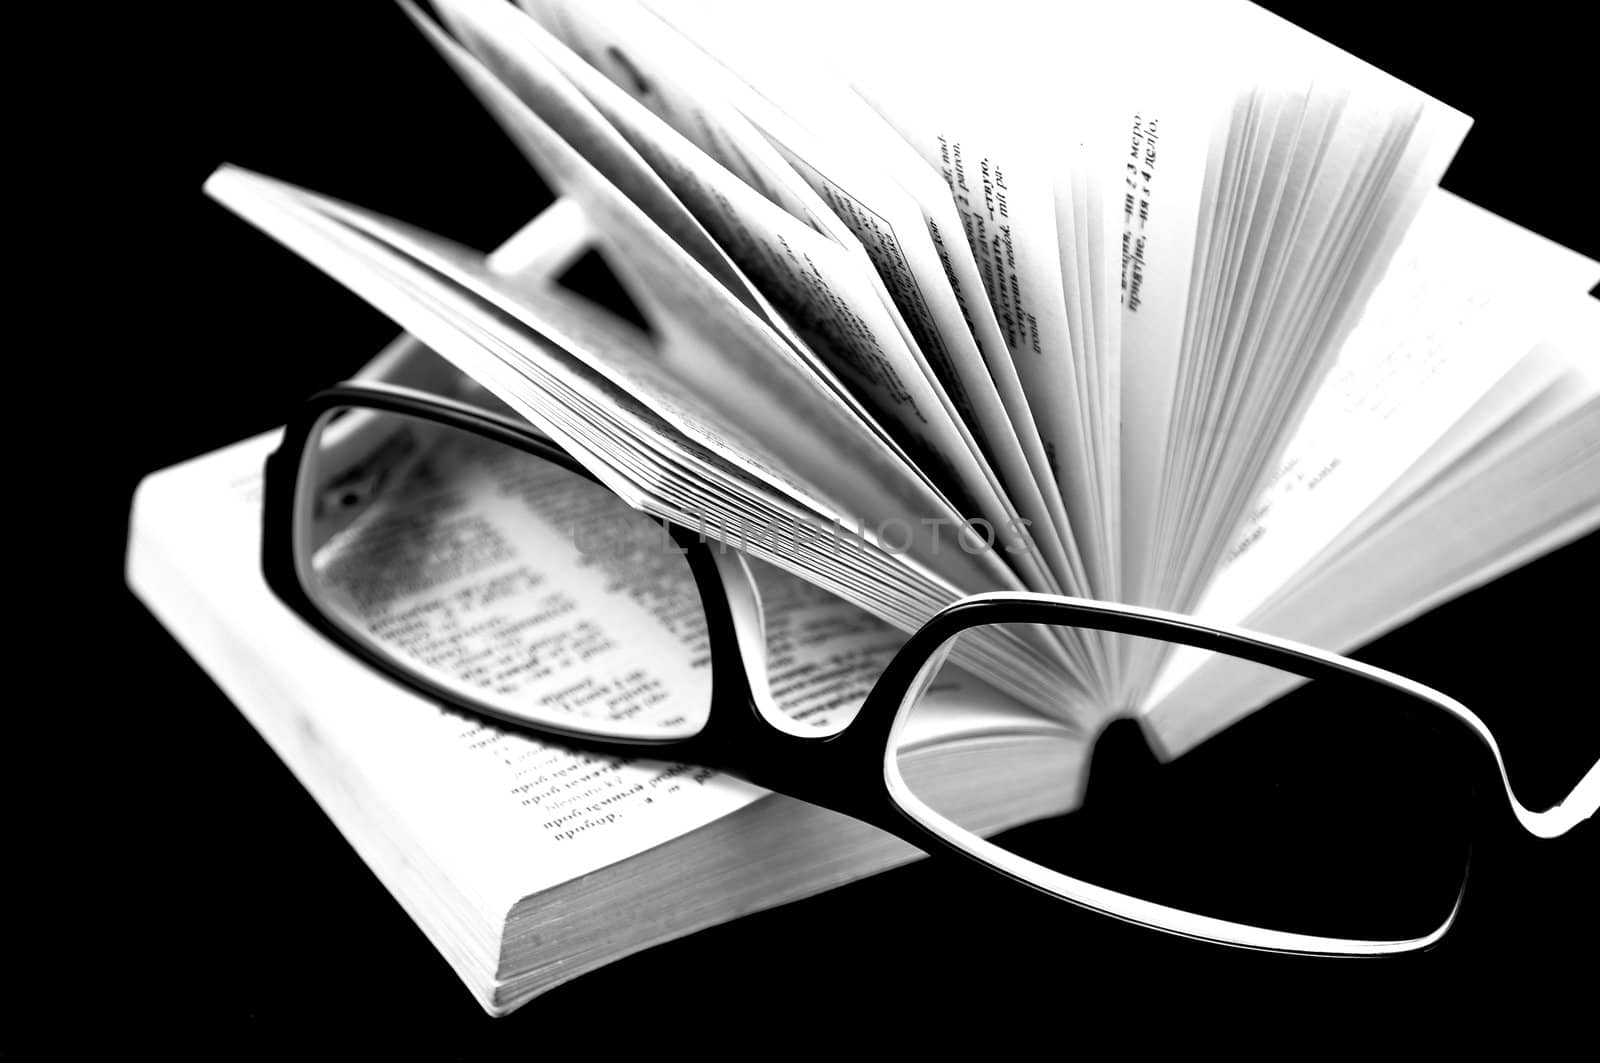 Small open book and glasses on it, isolated on black background